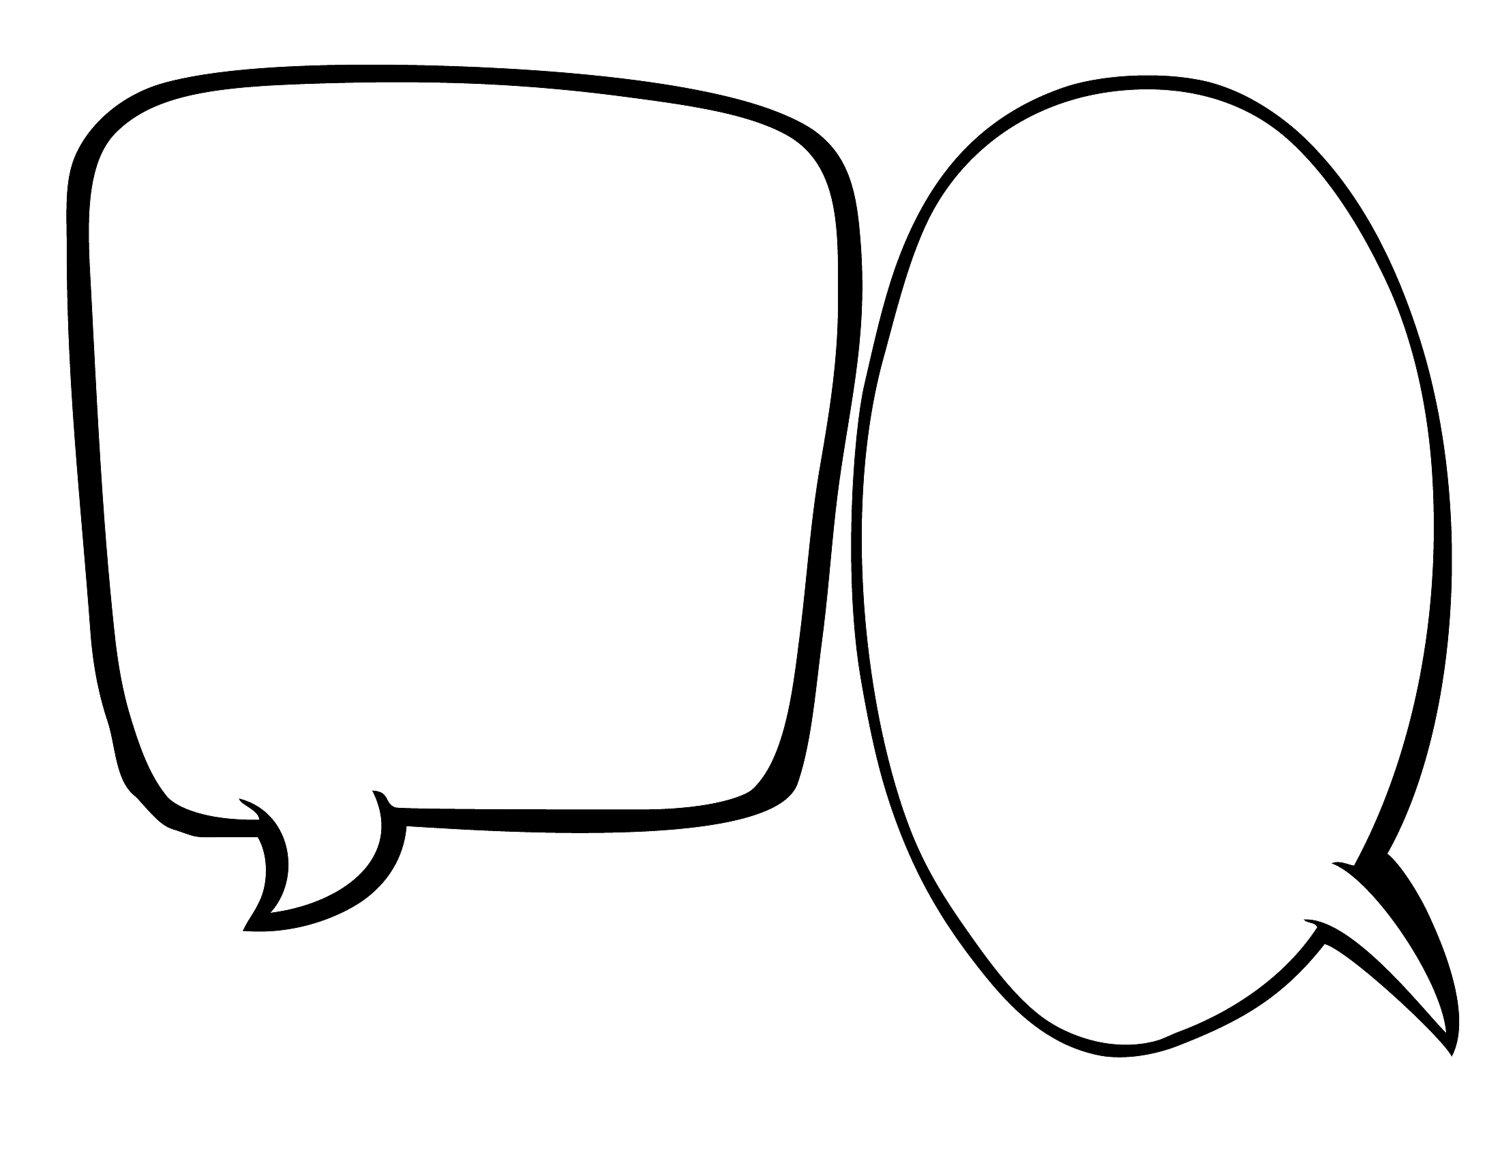 Free Blank Conversation Bubble Download Free Clip Art Free Clip Art On Clipart Library Speech balloon comics text, comics speech bubble, blank bobble text, comics, angle, text png. clipart library